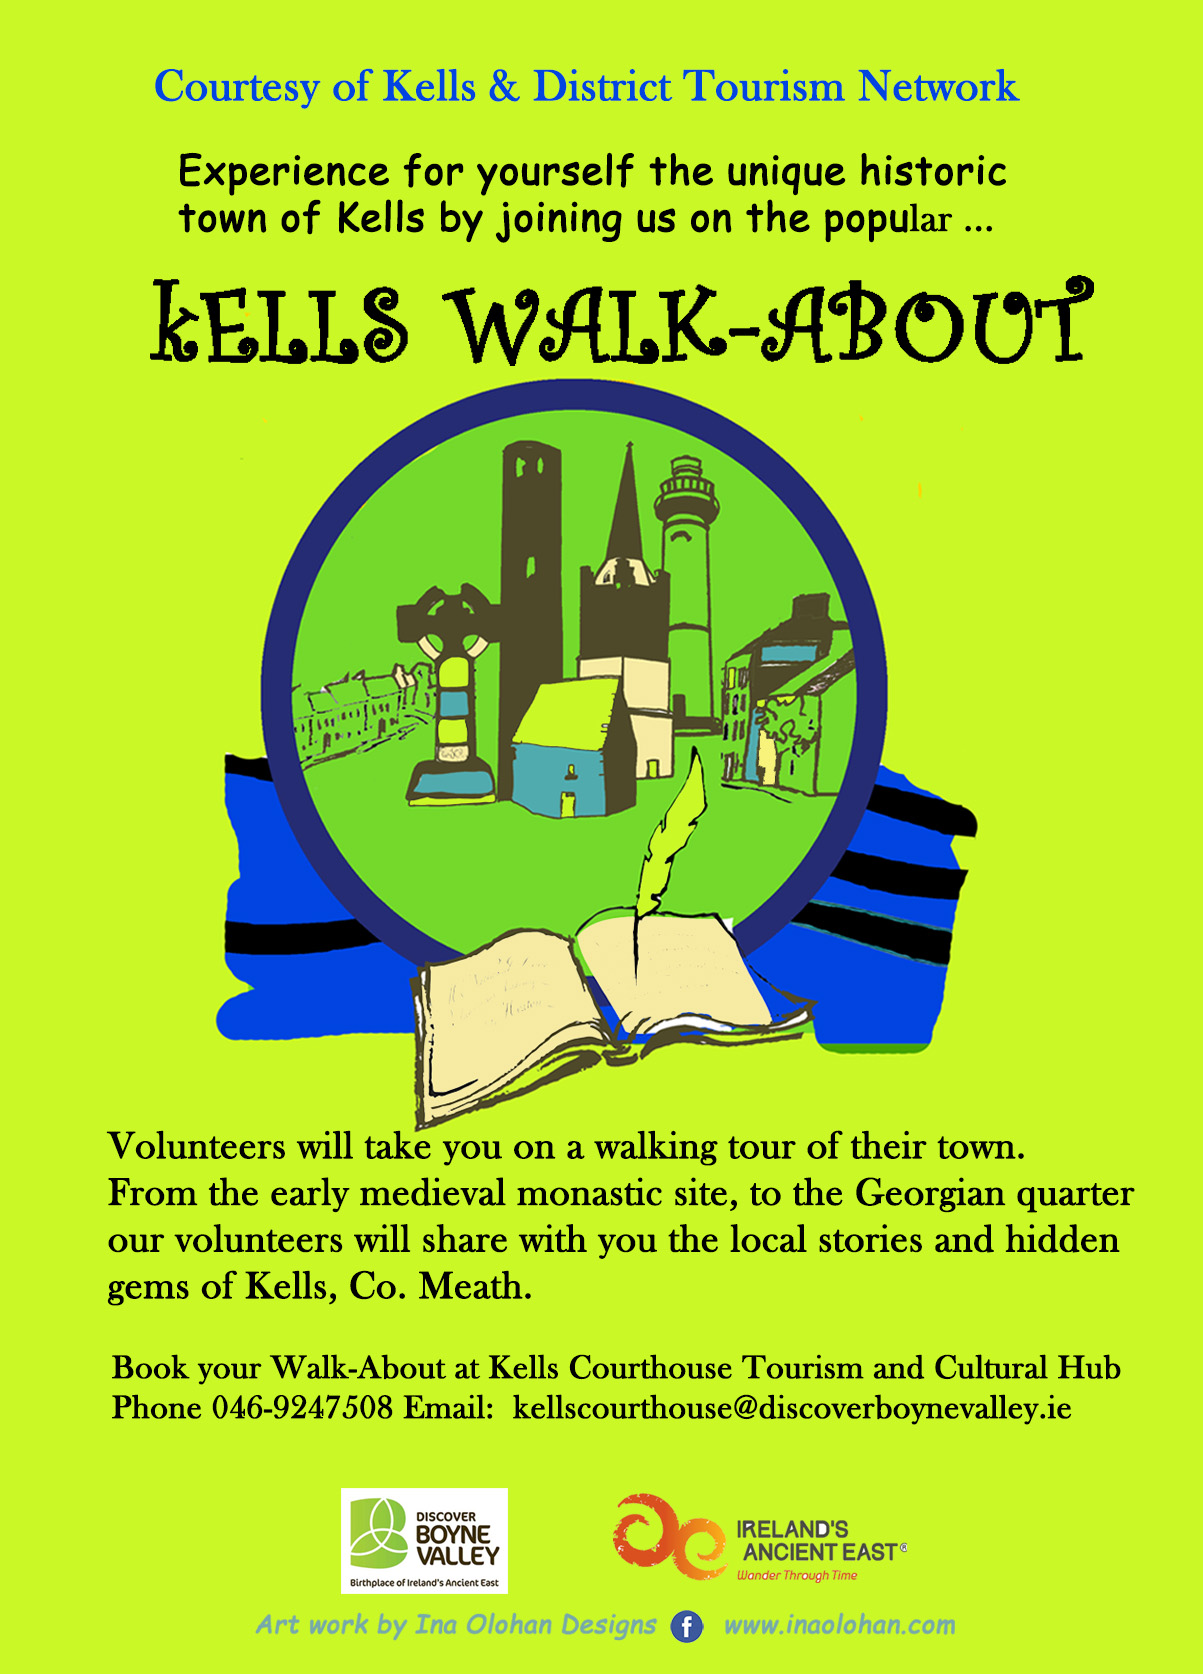 Kells Walkabout Tours info poster